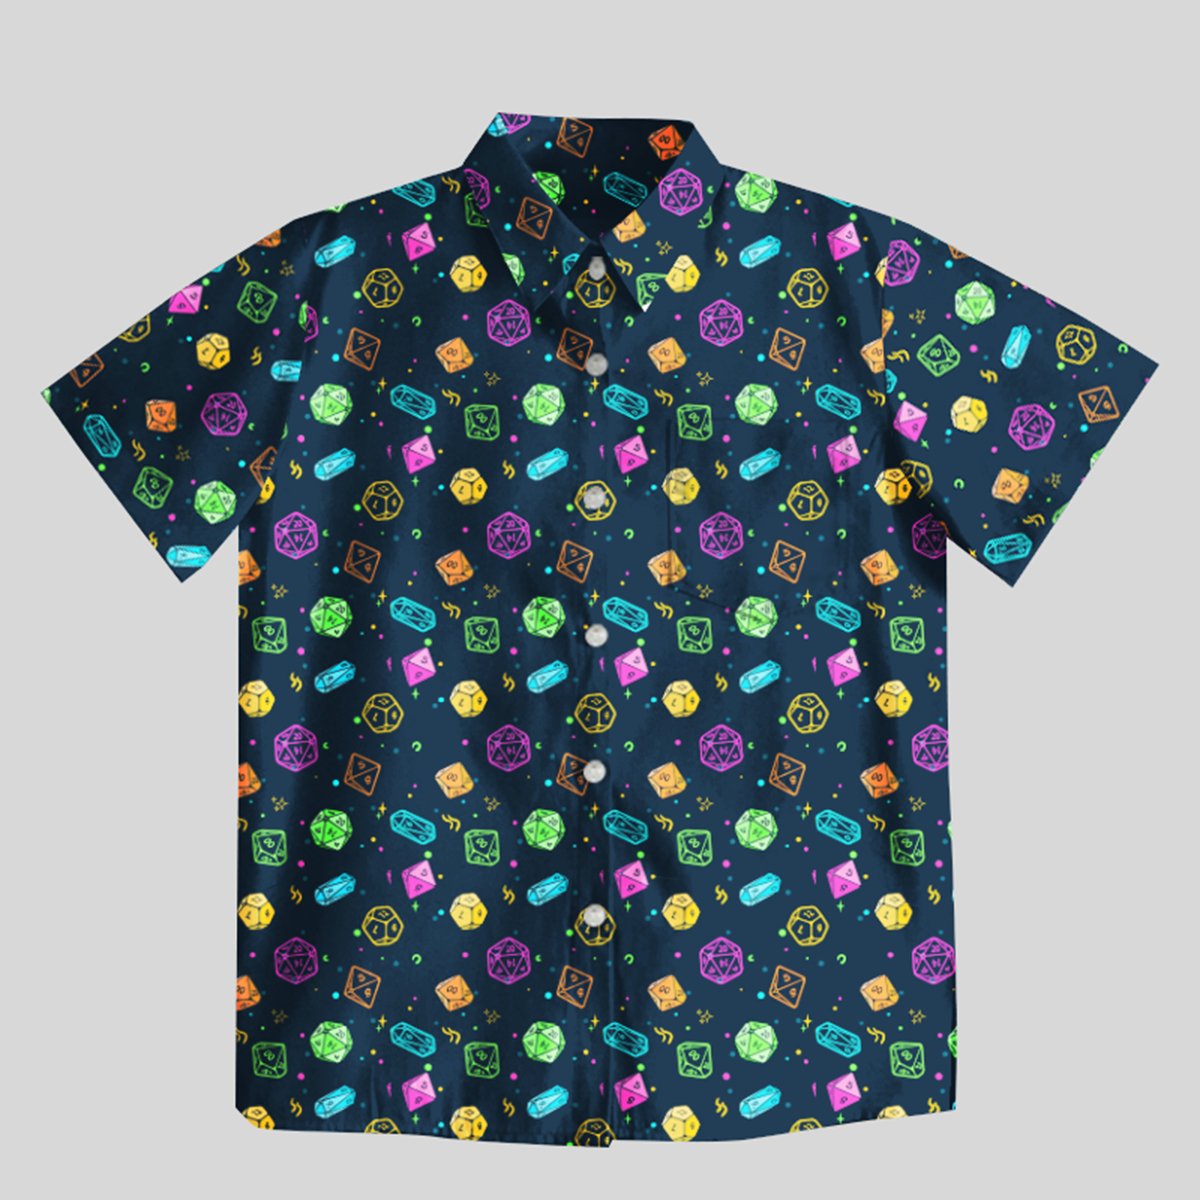 Geeksoutfit Colorful DND Dice RPG Button Up Pocket Shirt for Sale onlin